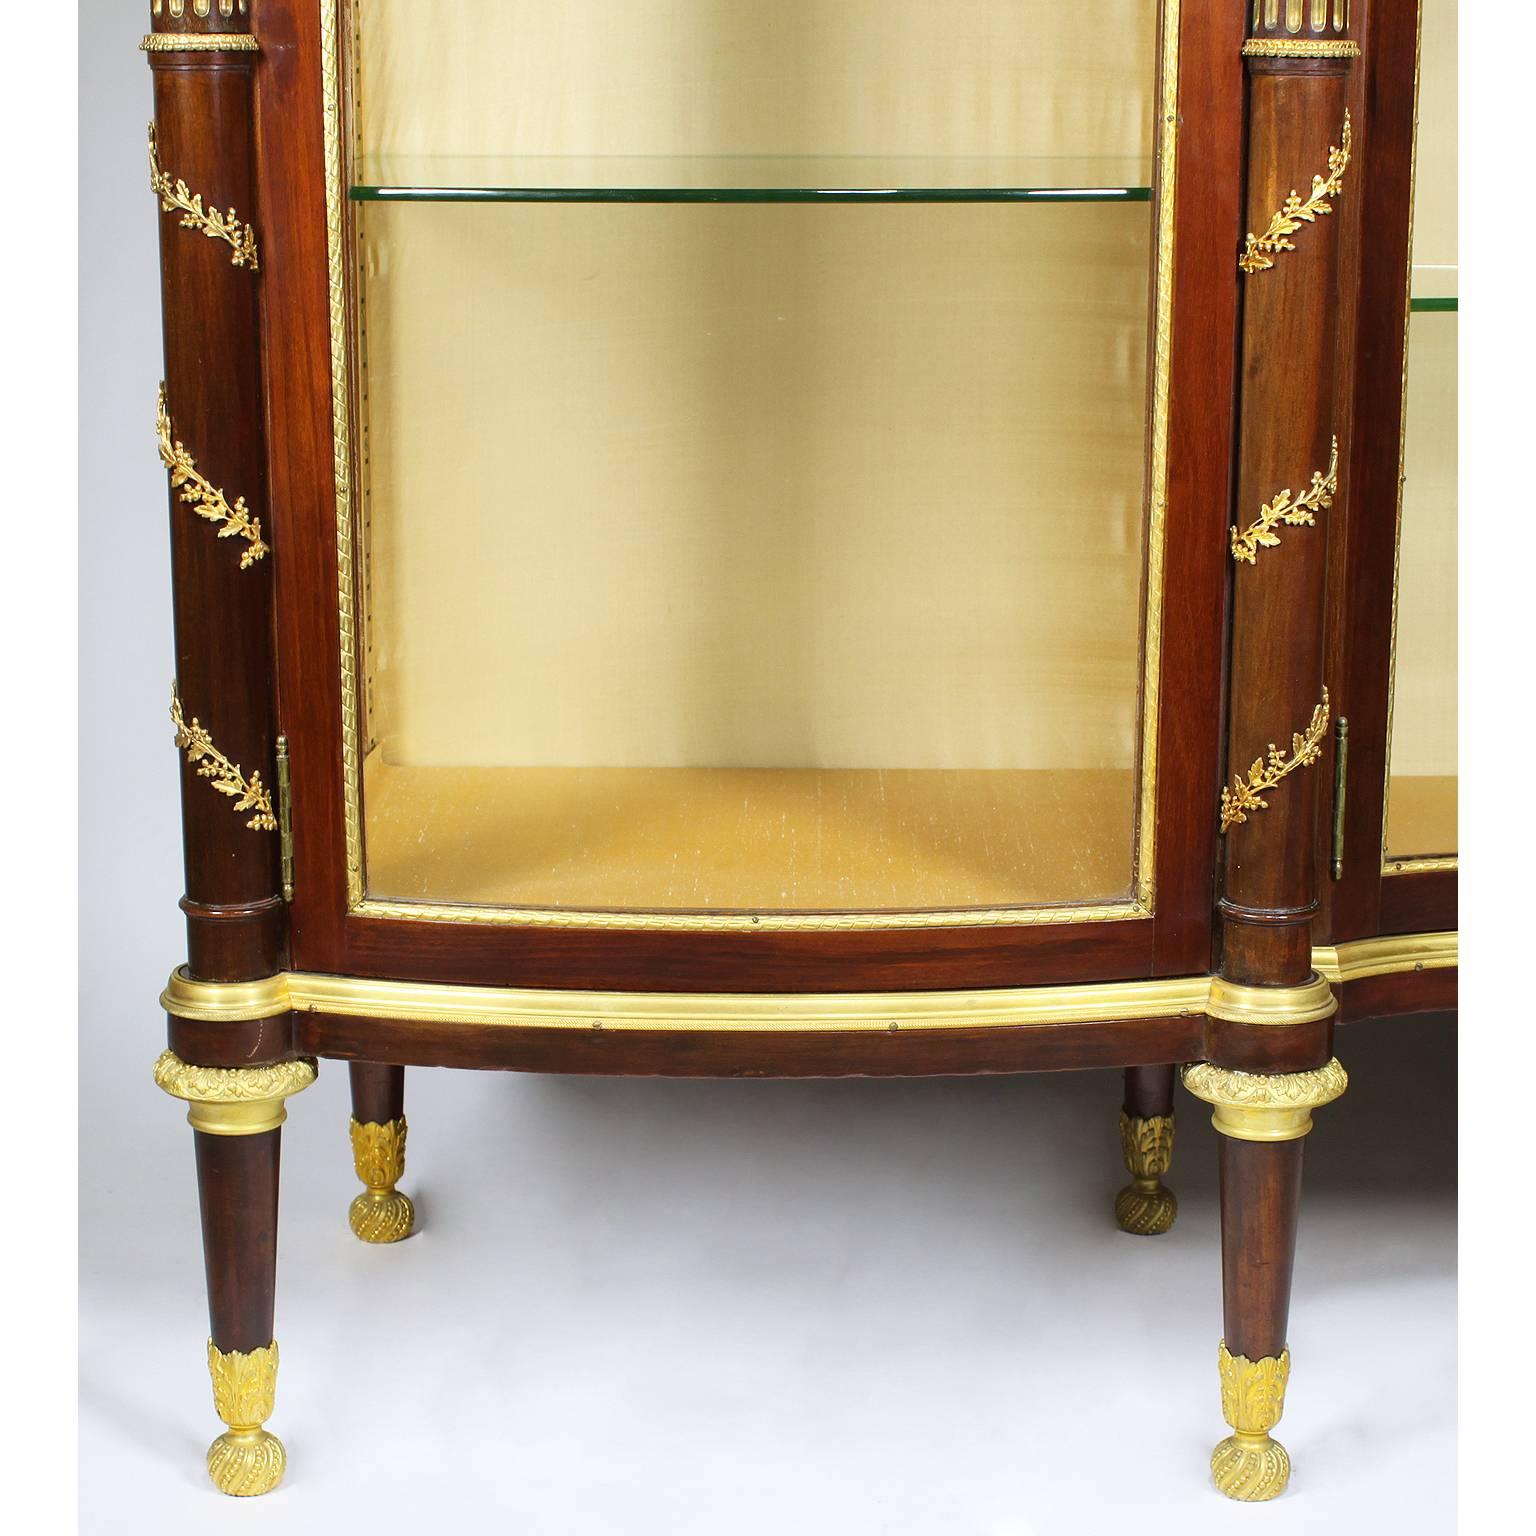 French 19th-20th Century Louis XVI Style Mahogany and Ormolu-Mounted Vitrine For Sale 3